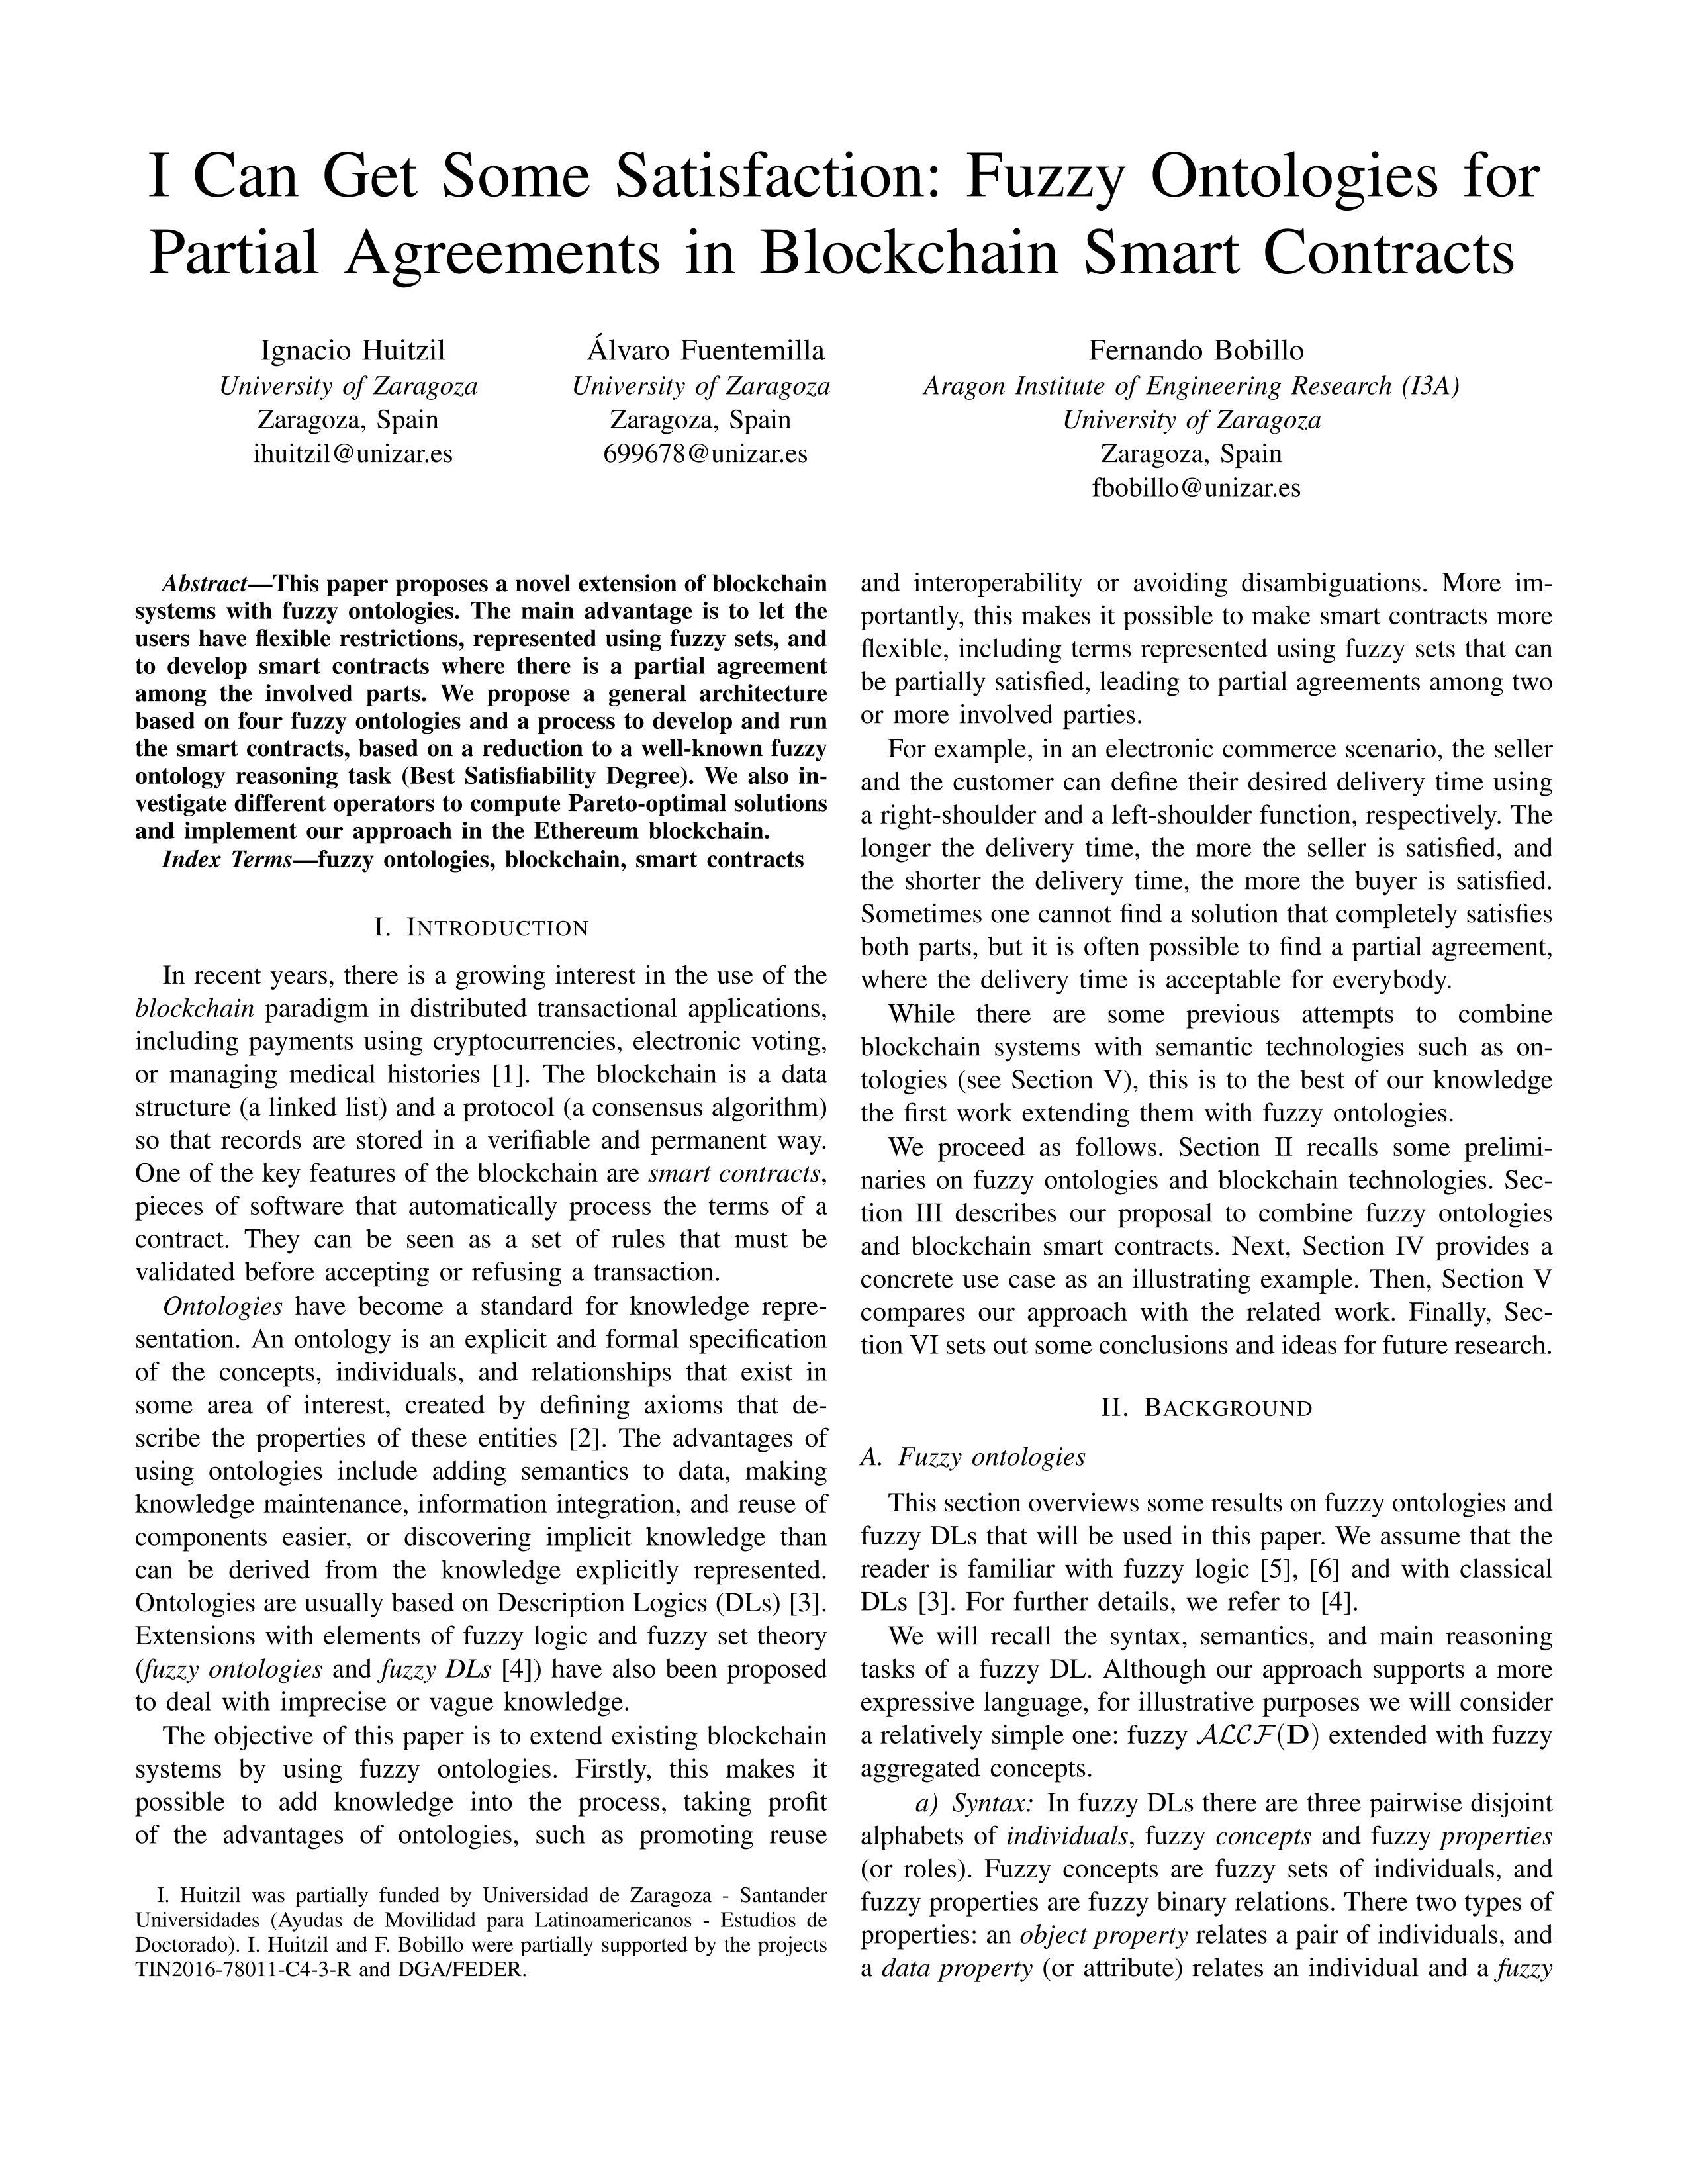 I can get some satisfaction: Fuzzy ontologies for partial agreements in blockchain smart contracts